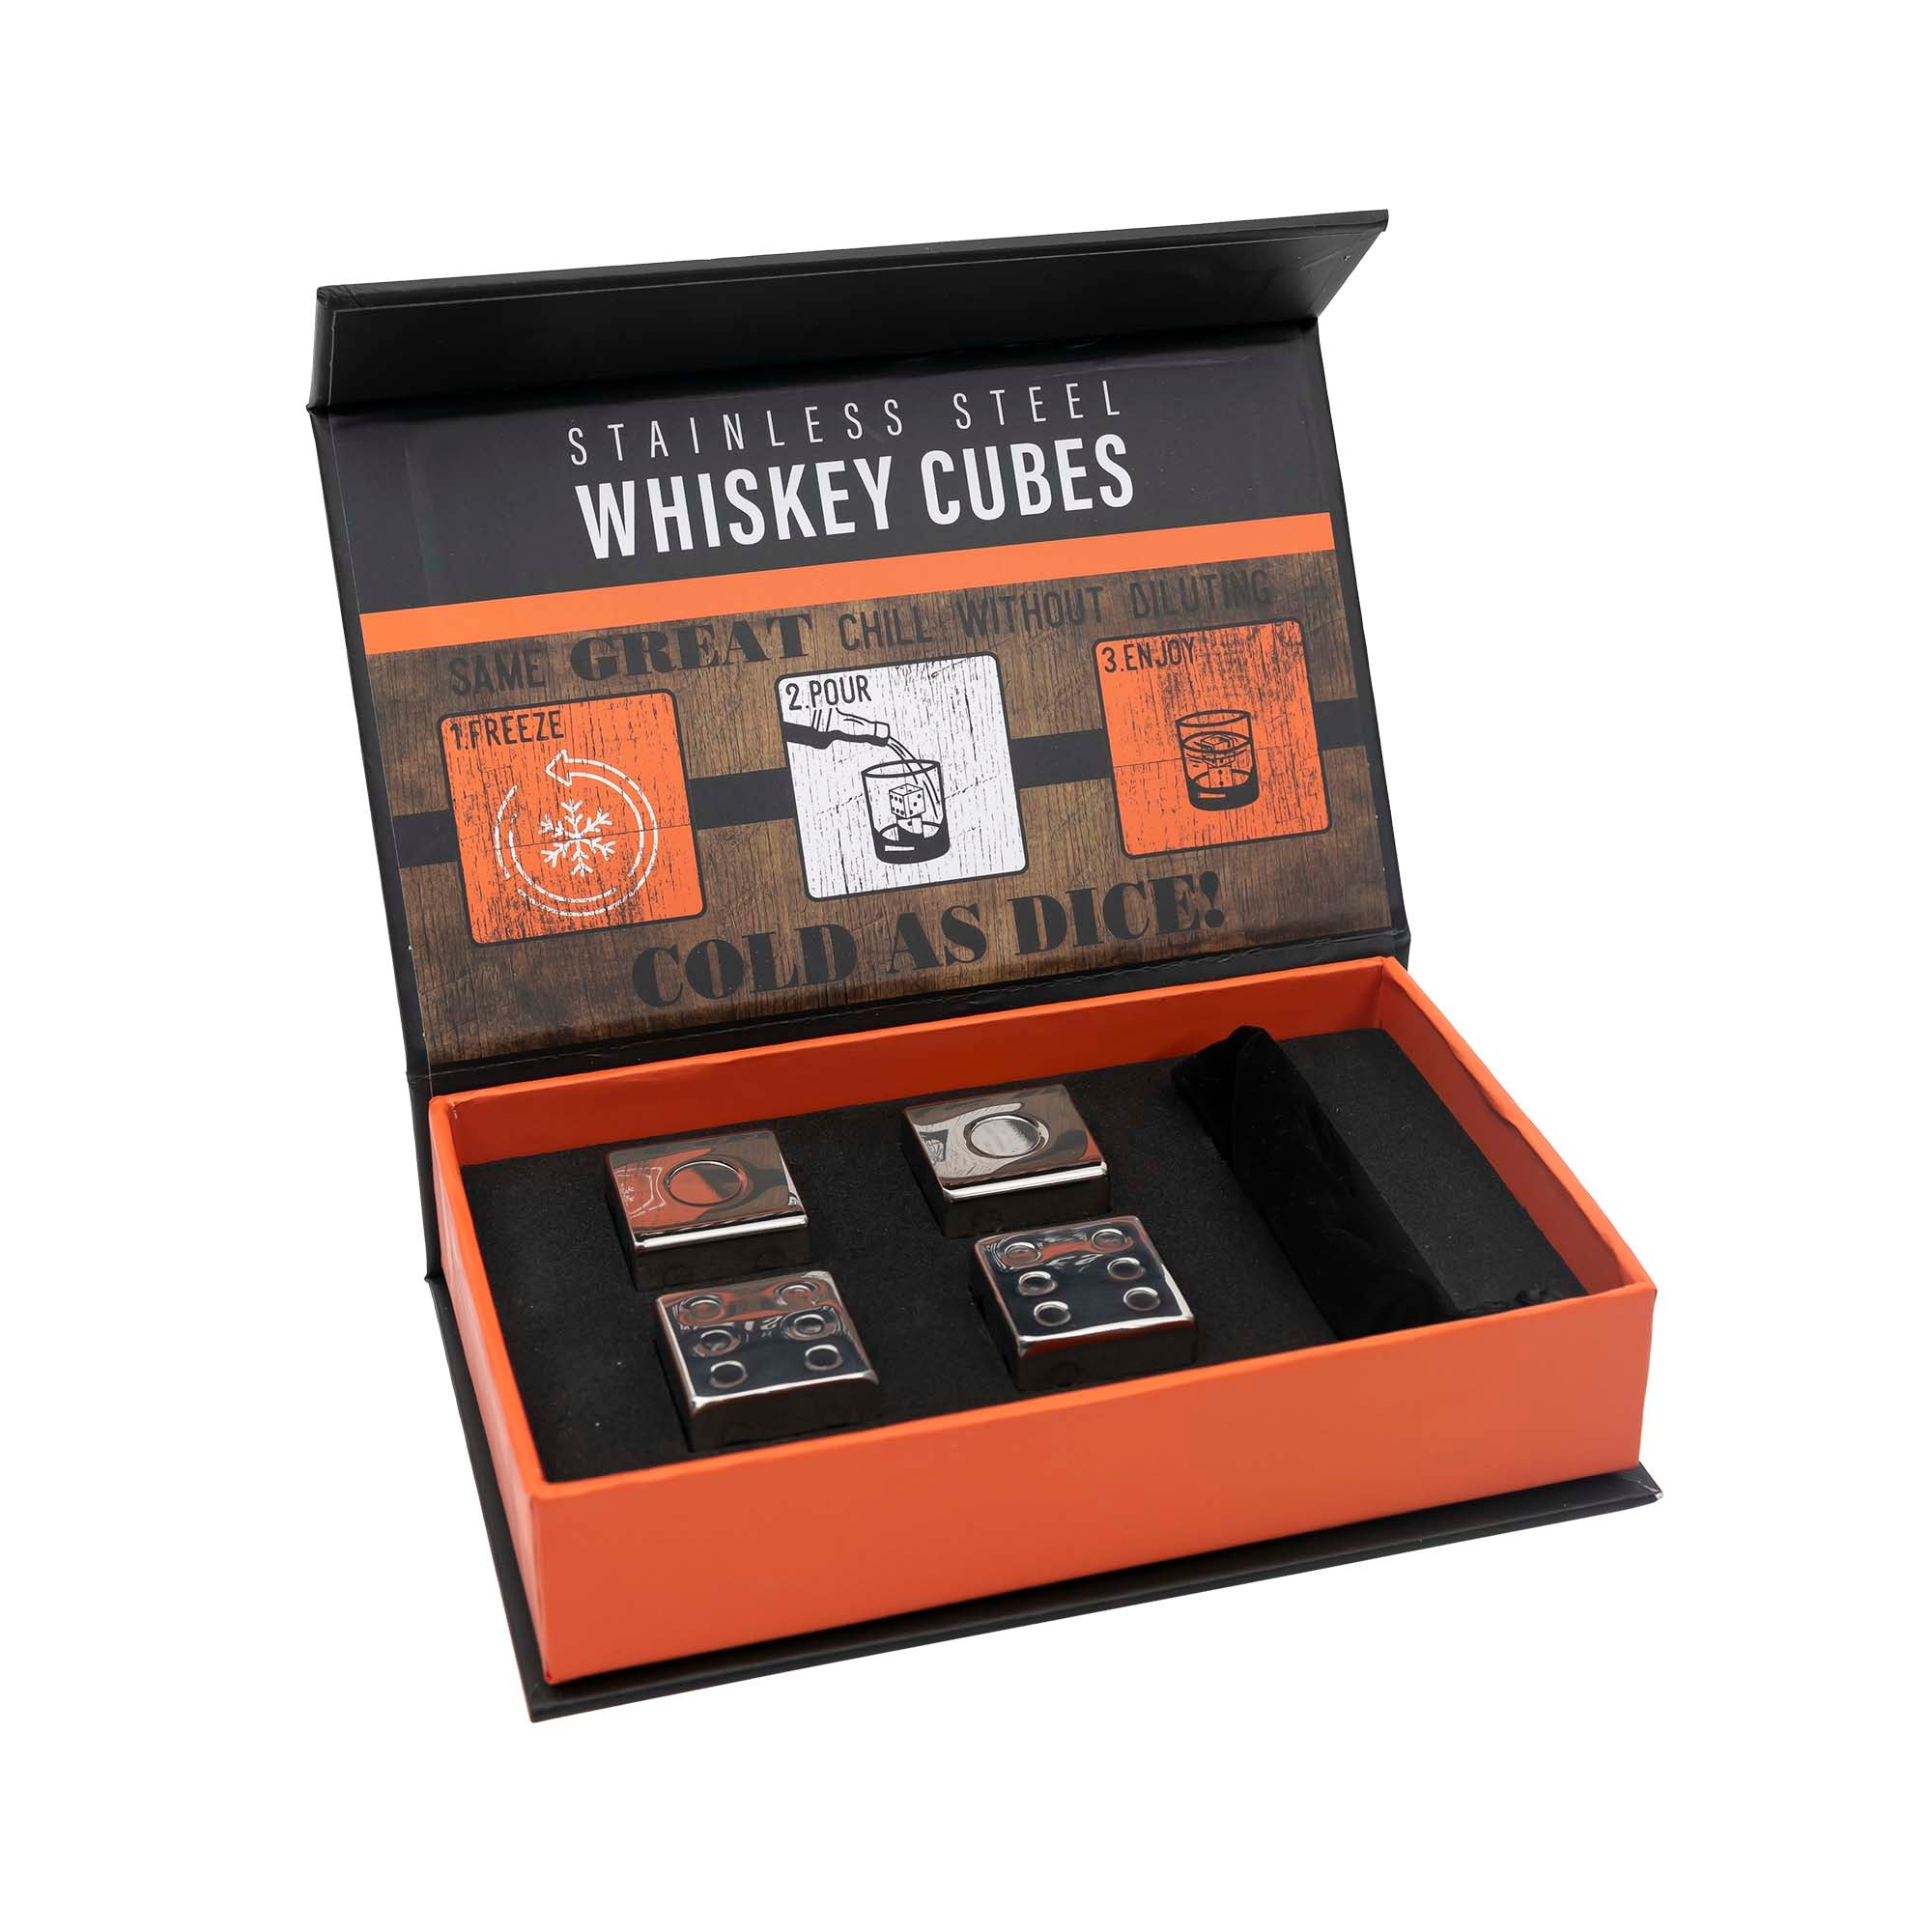 Cold as Dice! Whiskey Cubes